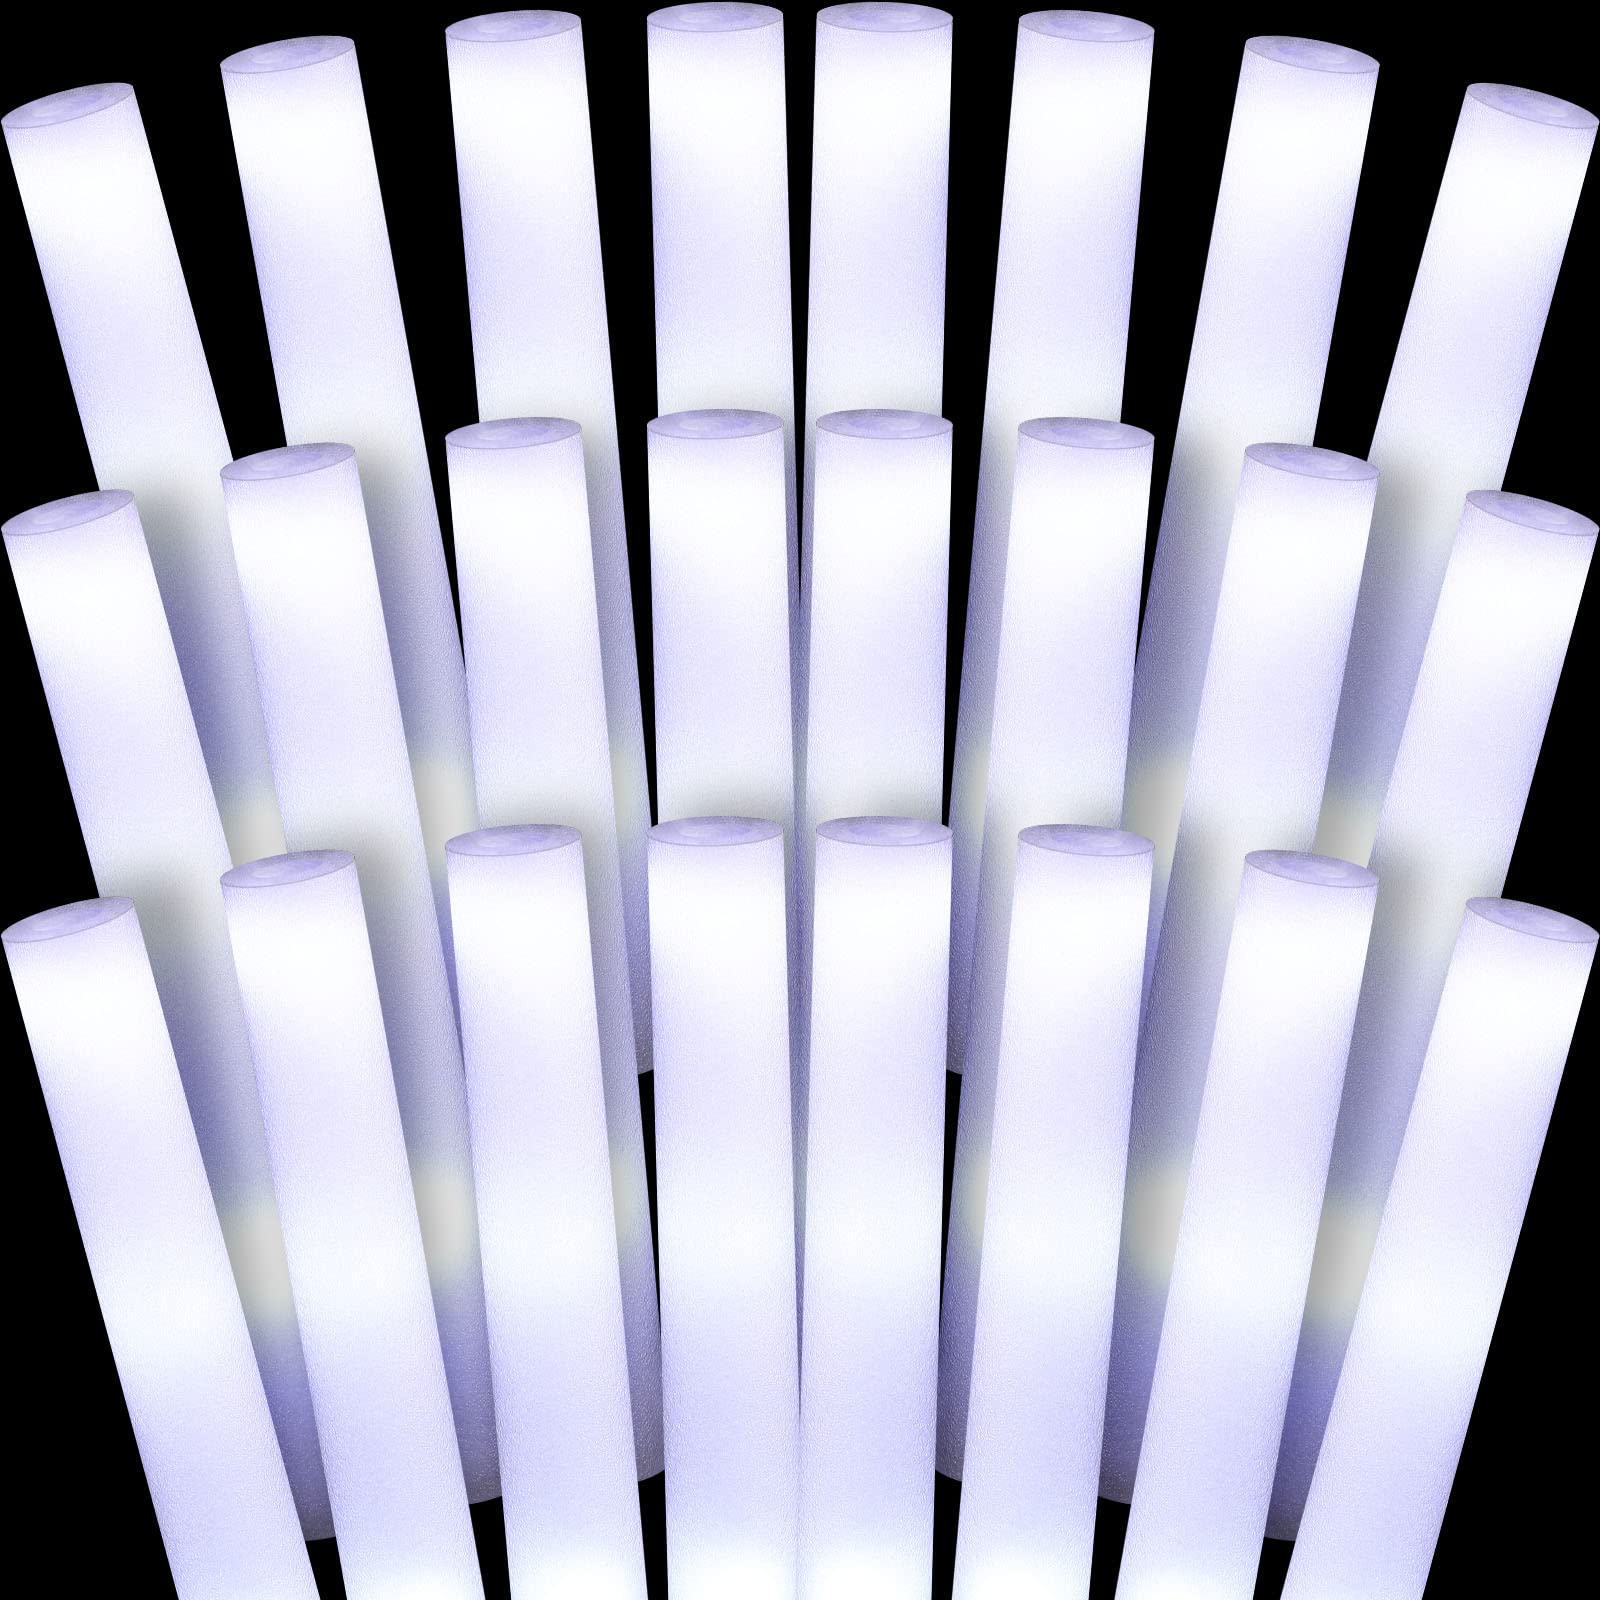 Liliful 100 Pcs Glow LED Cheer Foam Sticks Light up Glow Sticks Wedding Wand for Birthday Wedding Bridal Shower Raves Carnival Concert Glow in the Dark Party Favors Supplies (White)